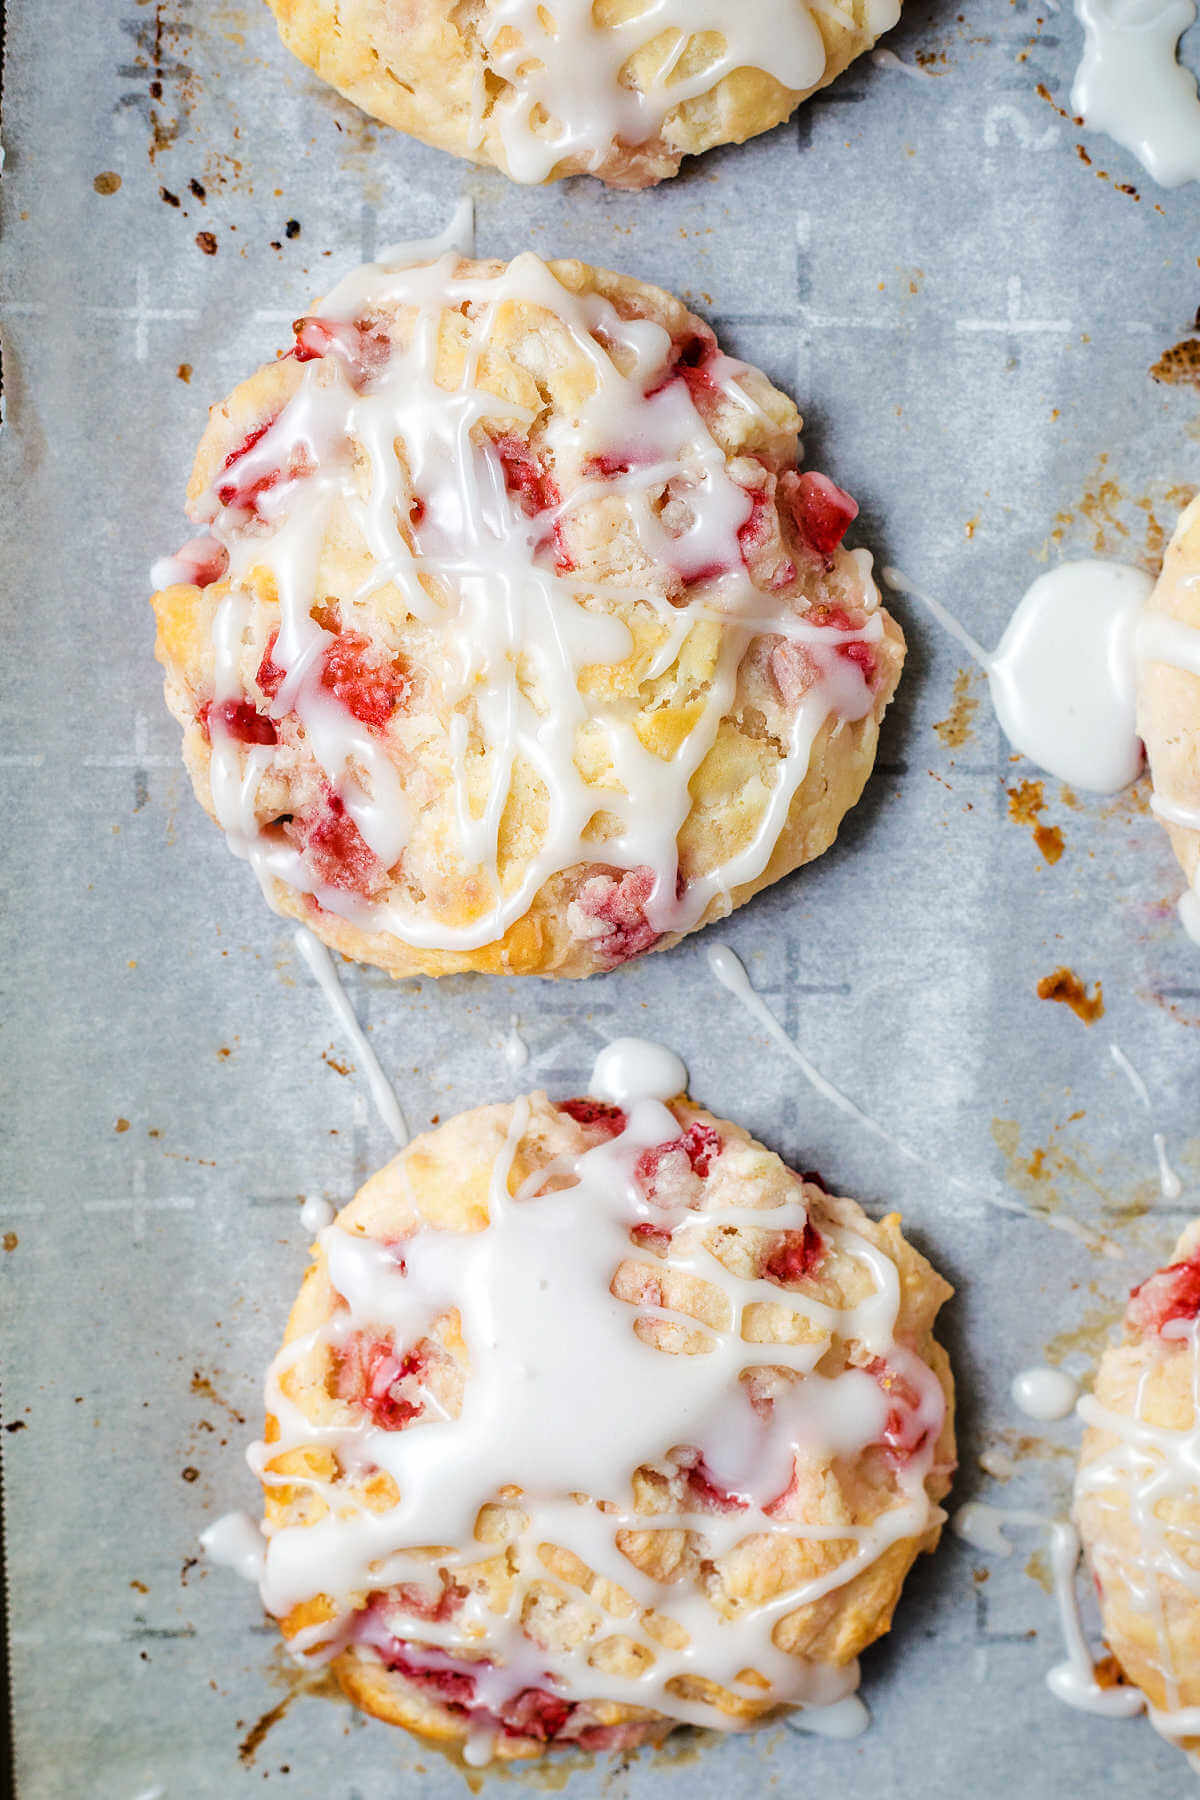 strawberry biscuits drizzled with powdered sugar glaze on a parchment paper lined baking sheet.